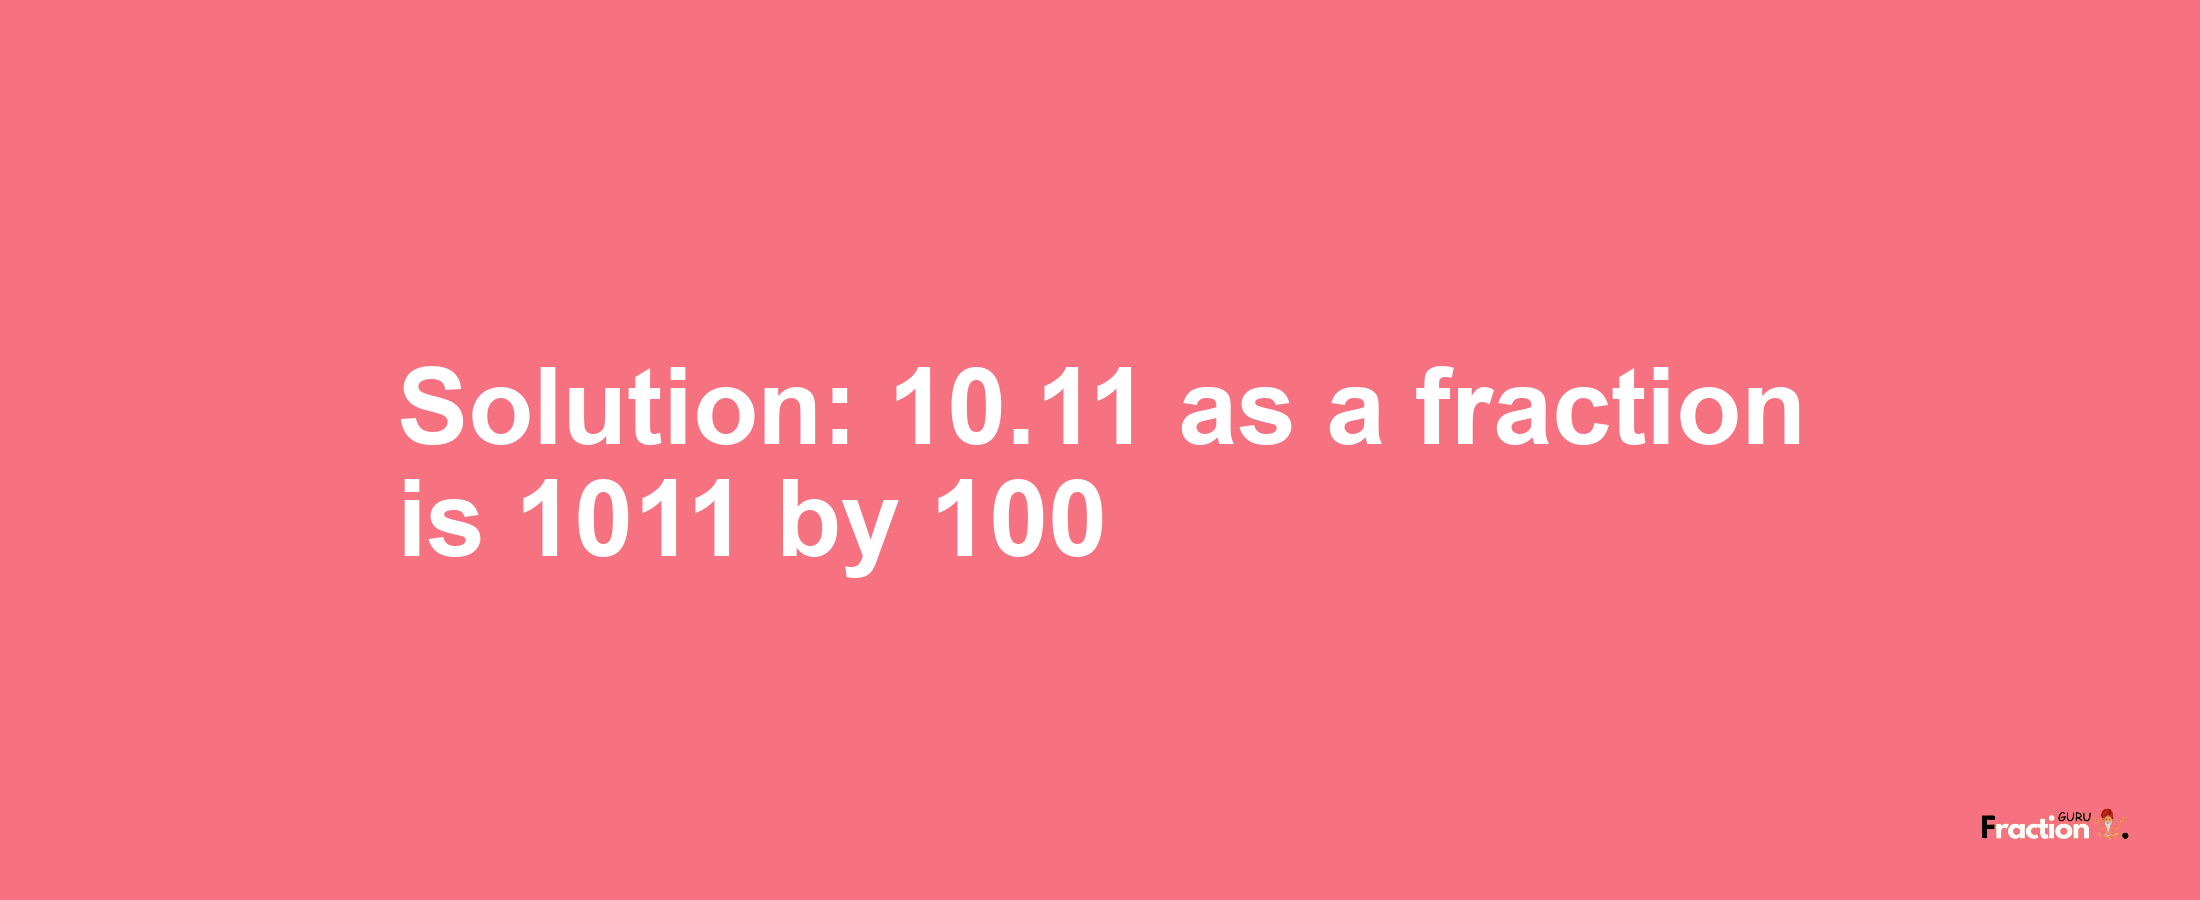 Solution:10.11 as a fraction is 1011/100